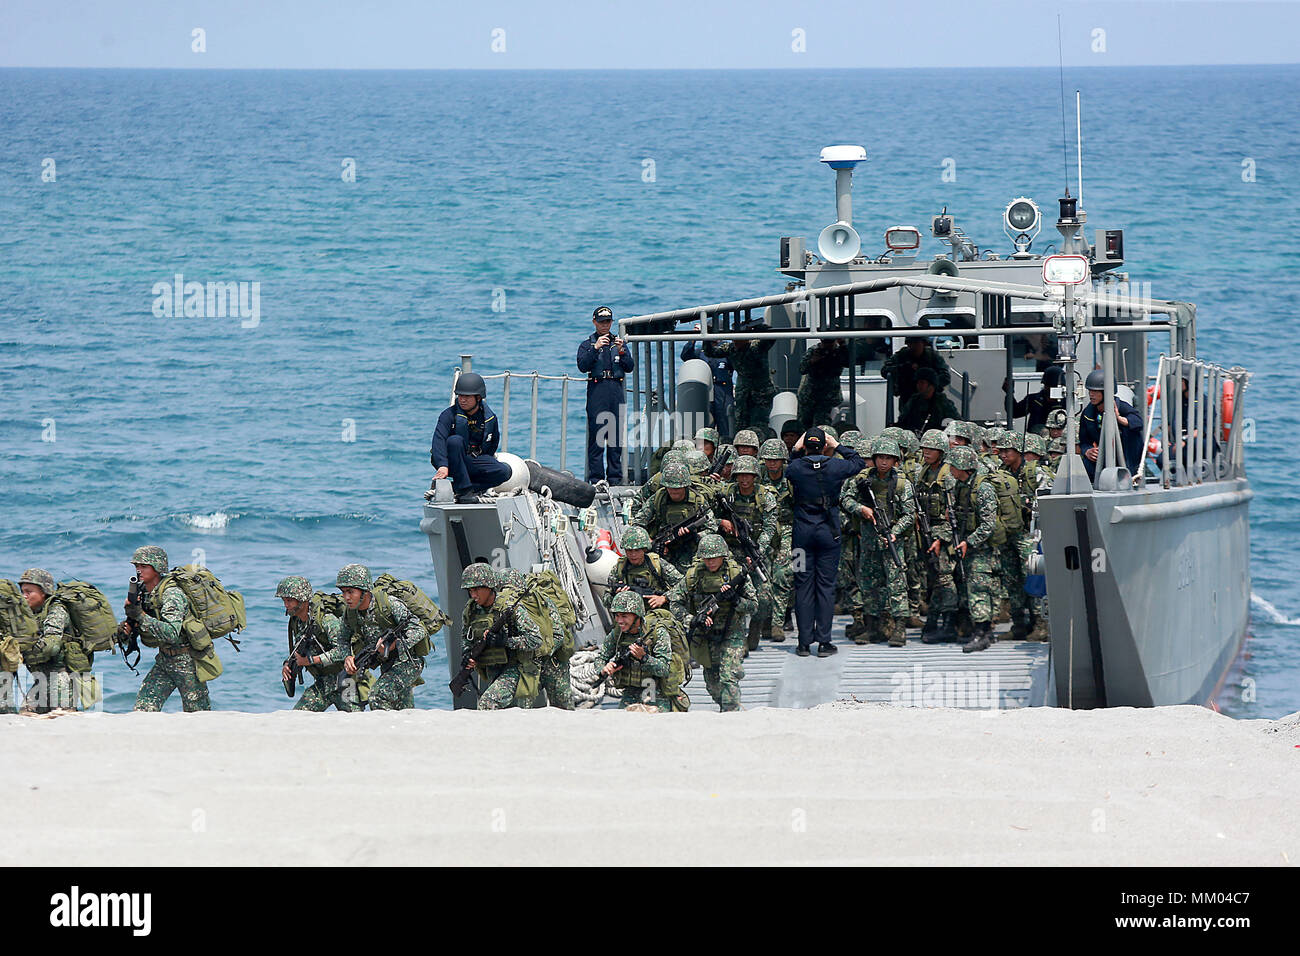 Zambales, Philippines. 9th May, 2018. Filipino soldiers participate in the Amphibious Landing training as part of the 2018 Balikatan Exercises between the Philippines and the United States in Zambales Province, the Philippines, on May 9, 2018. Credit: Rouelle Umali/Xinhua/Alamy Live News Stock Photo